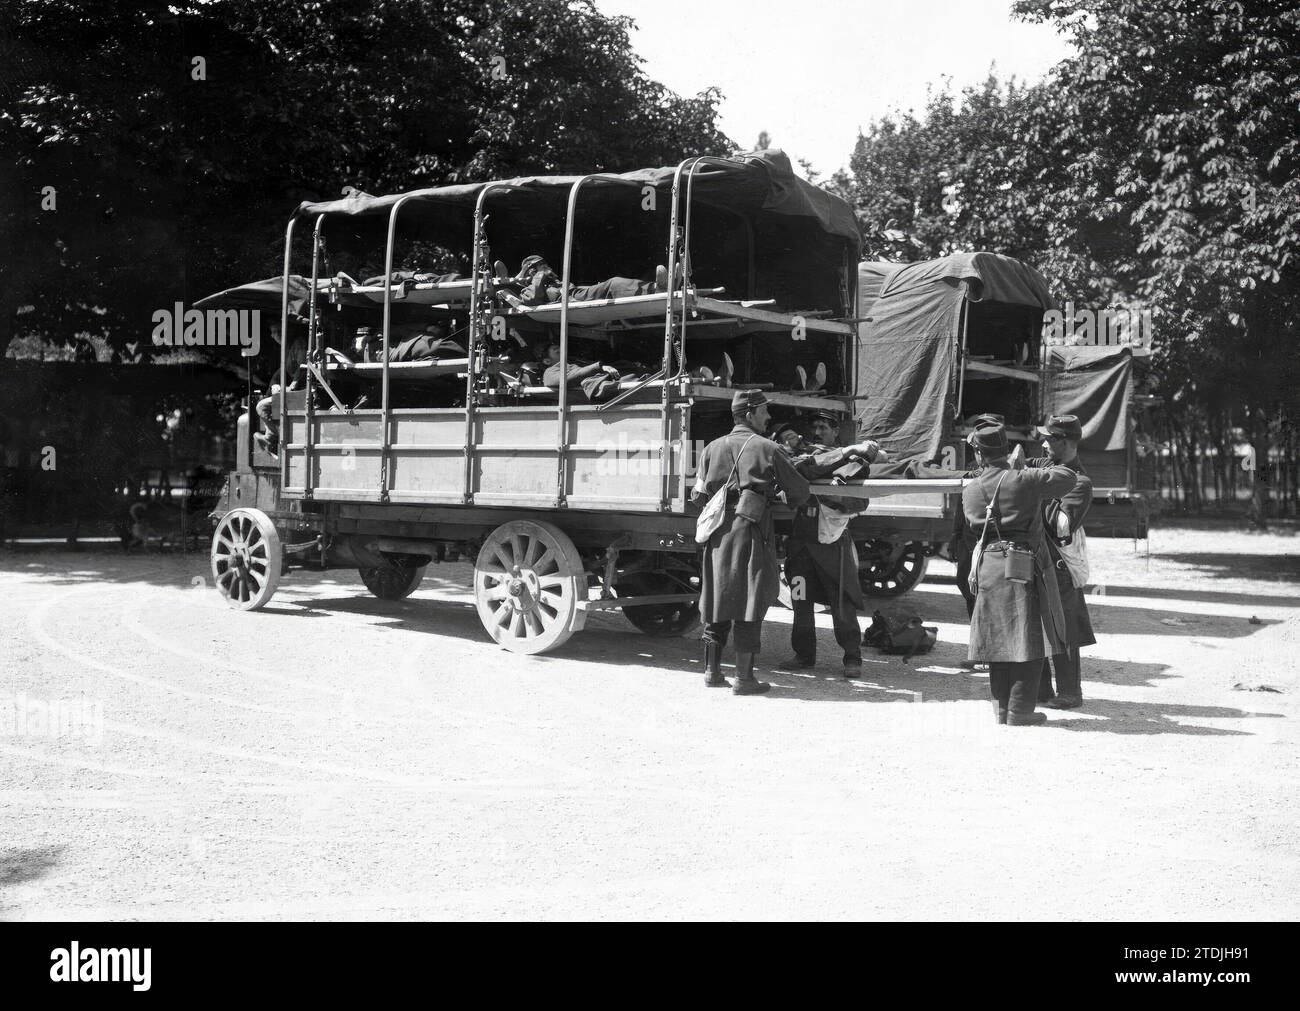 07/31/1914. After a Combat. Placing Wounded French Soldiers in a Military Medical Truck. Credit: Album / Archivo ABC / M. Rol Stock Photo